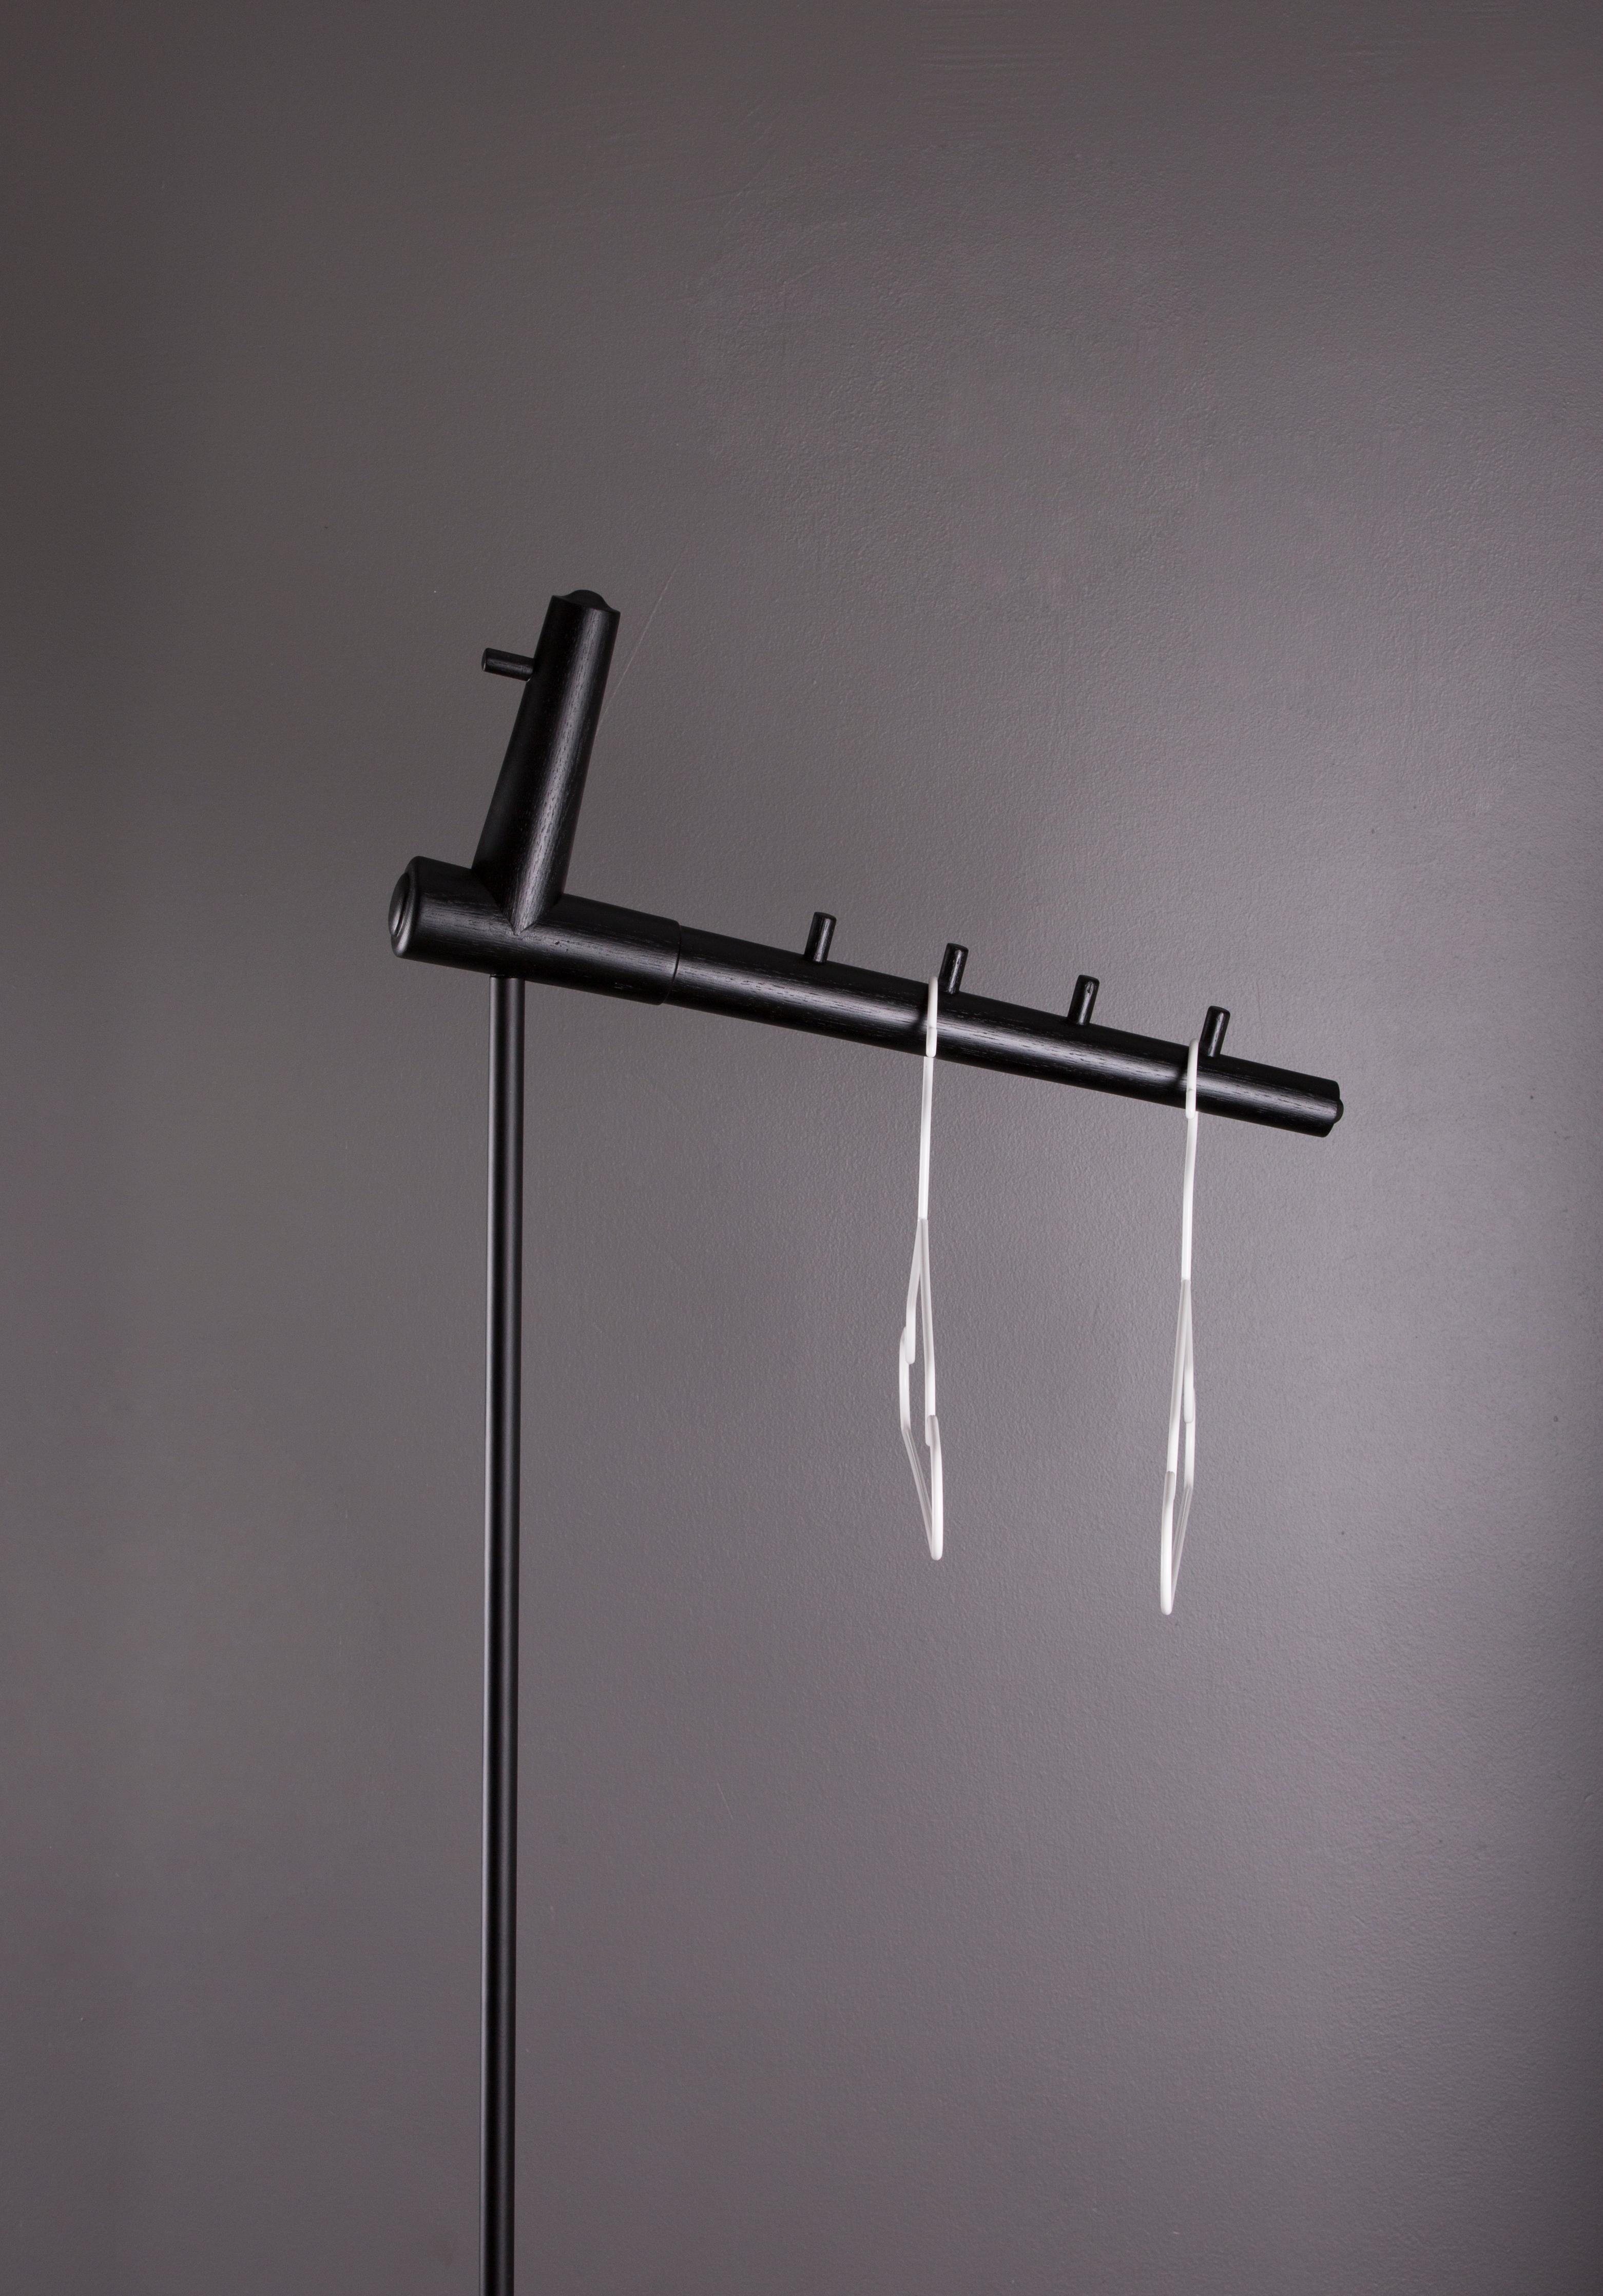 Aves hanger by Rectangle Studio
Dimensions: W 24 x D 48 x H 125 cm
Materials: Massive oak, black wood oil, black paint coating on metal

Aves provides practical solutions in constricted areas. When the cloth is hung, the Aves, which is the